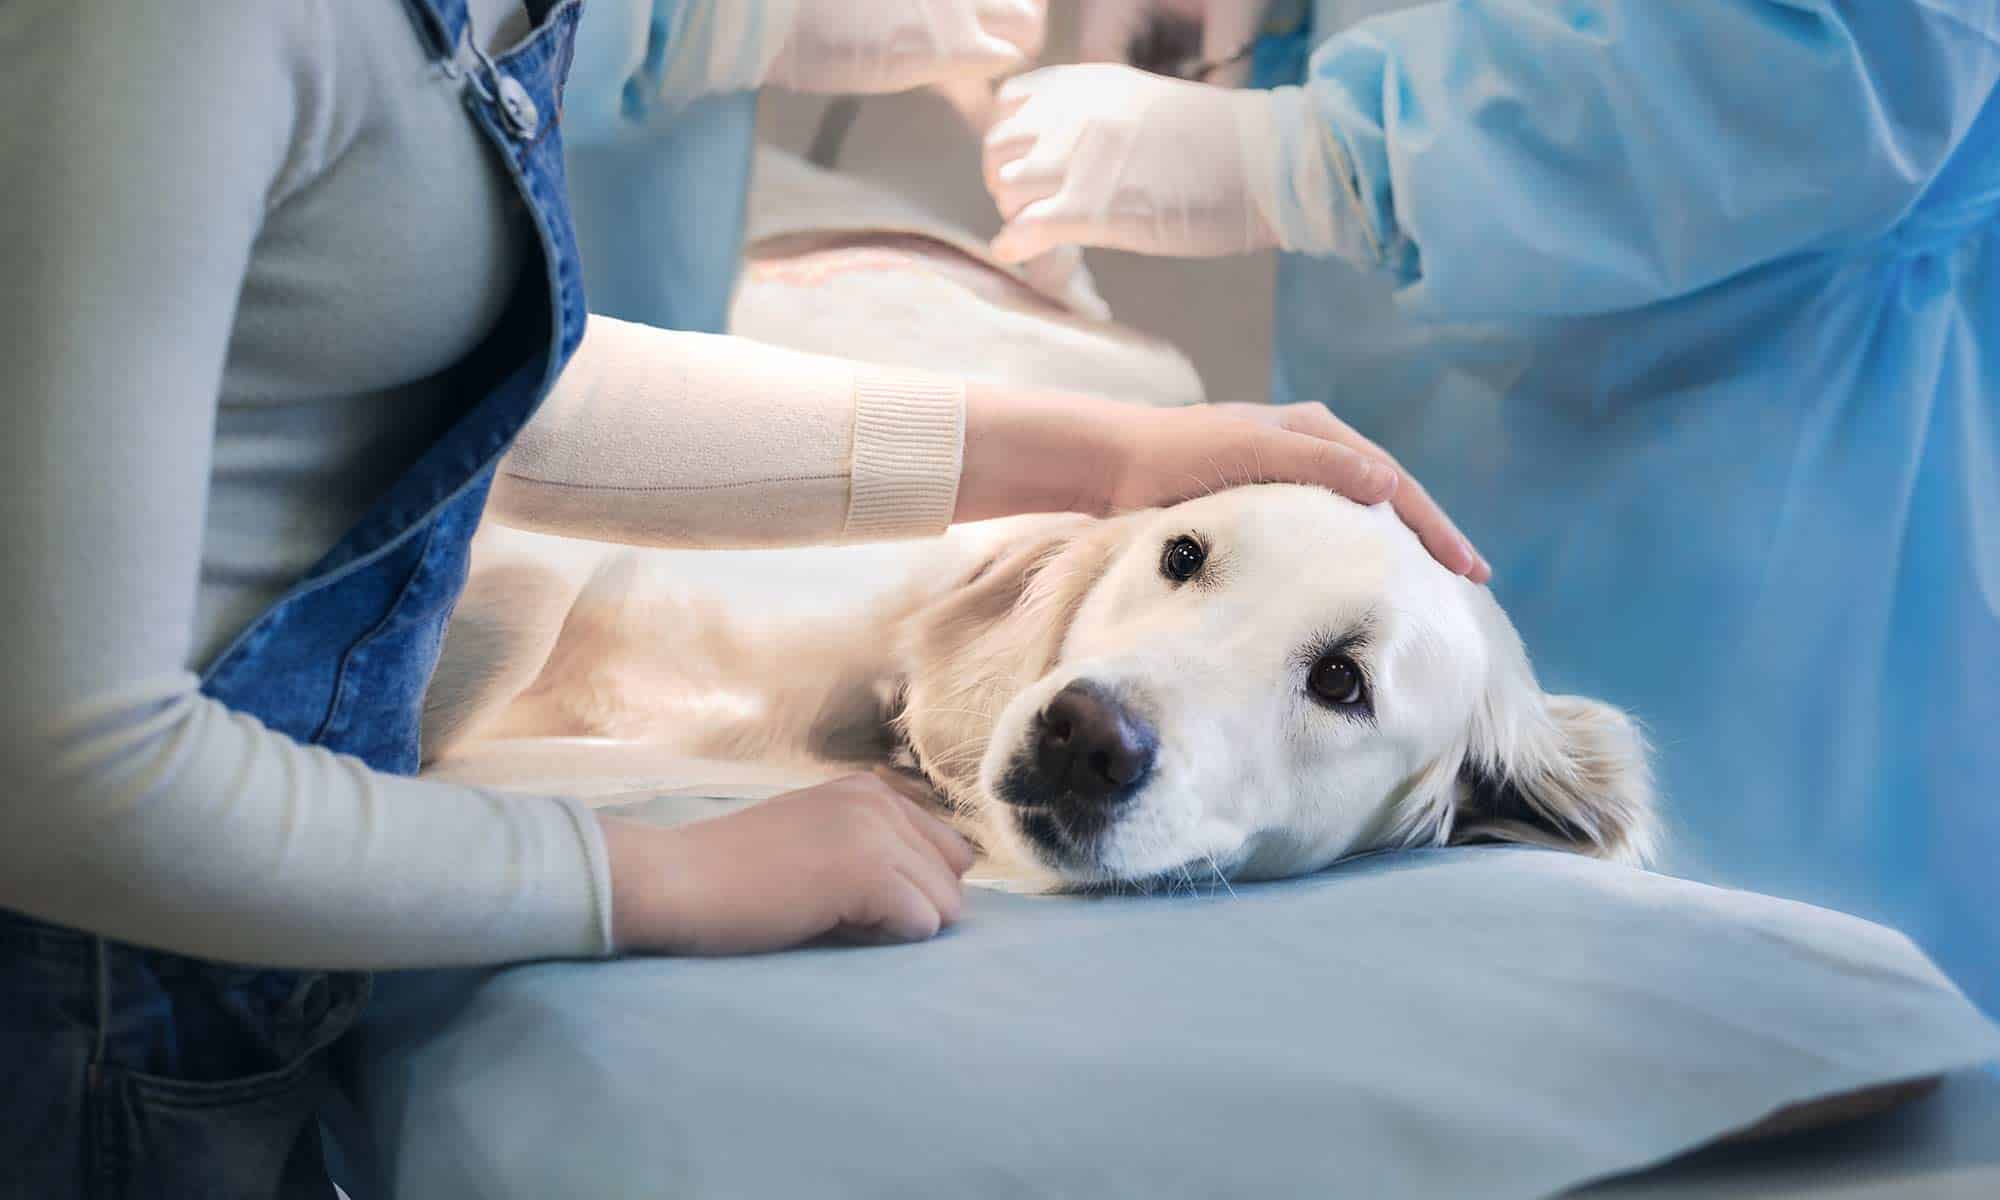 A dog being treated in an emergency room